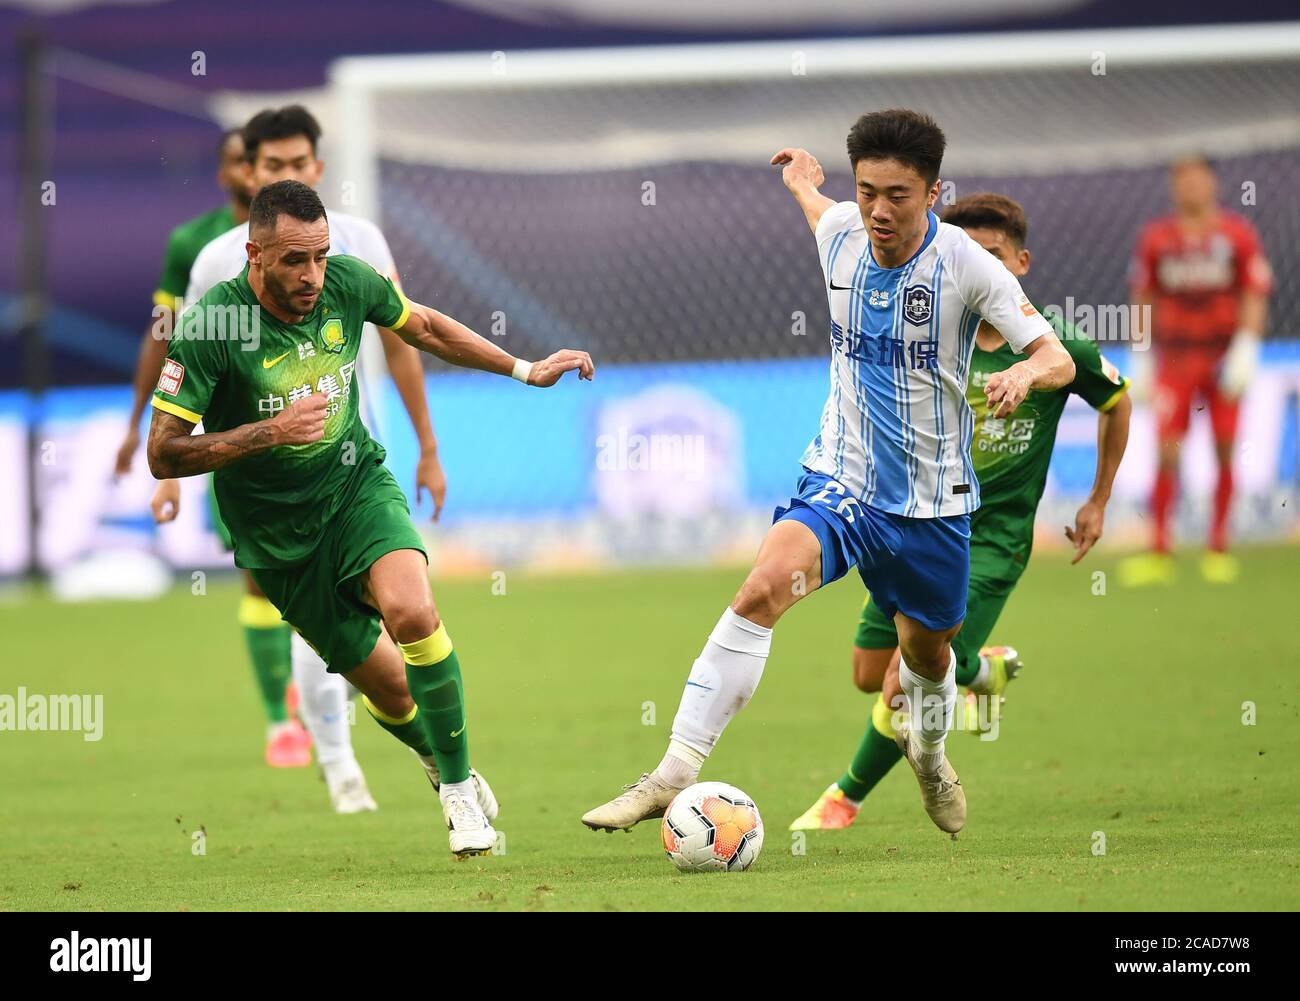 Suzhou, China's Jiangsu Province. 6th Aug, 2020. Renato Augusto (L) of Beijing Sinobo Guoan and Che Shiwei of Tianjin TEDA competes during the third round match at the postponed 2020 season Chinese Football Association Super League (CSL) Suzhou Division in Suzhou, east China's Jiangsu Province, Aug. 6, 2020. Credit: Ji Chunpeng/Xinhua/Alamy Live News Stock Photo